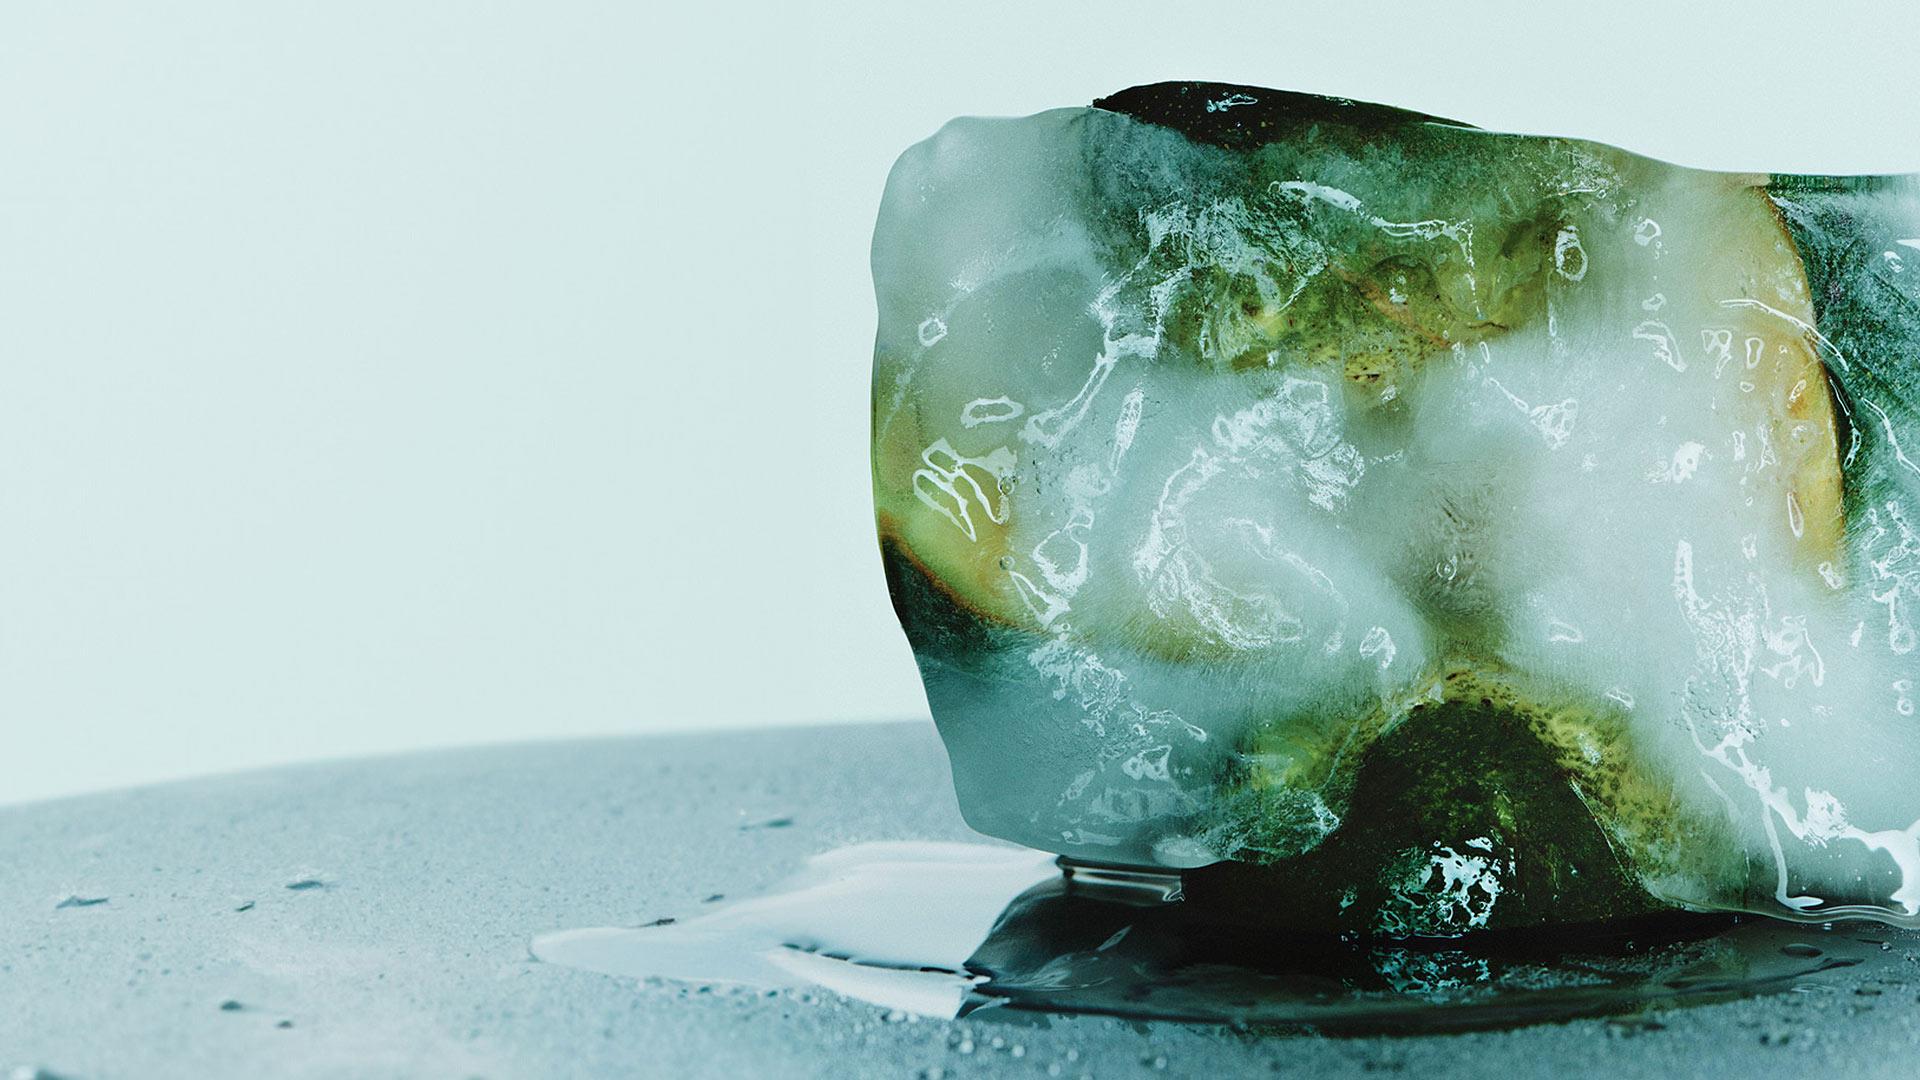 Avocado suspended in block of ice melting on surface